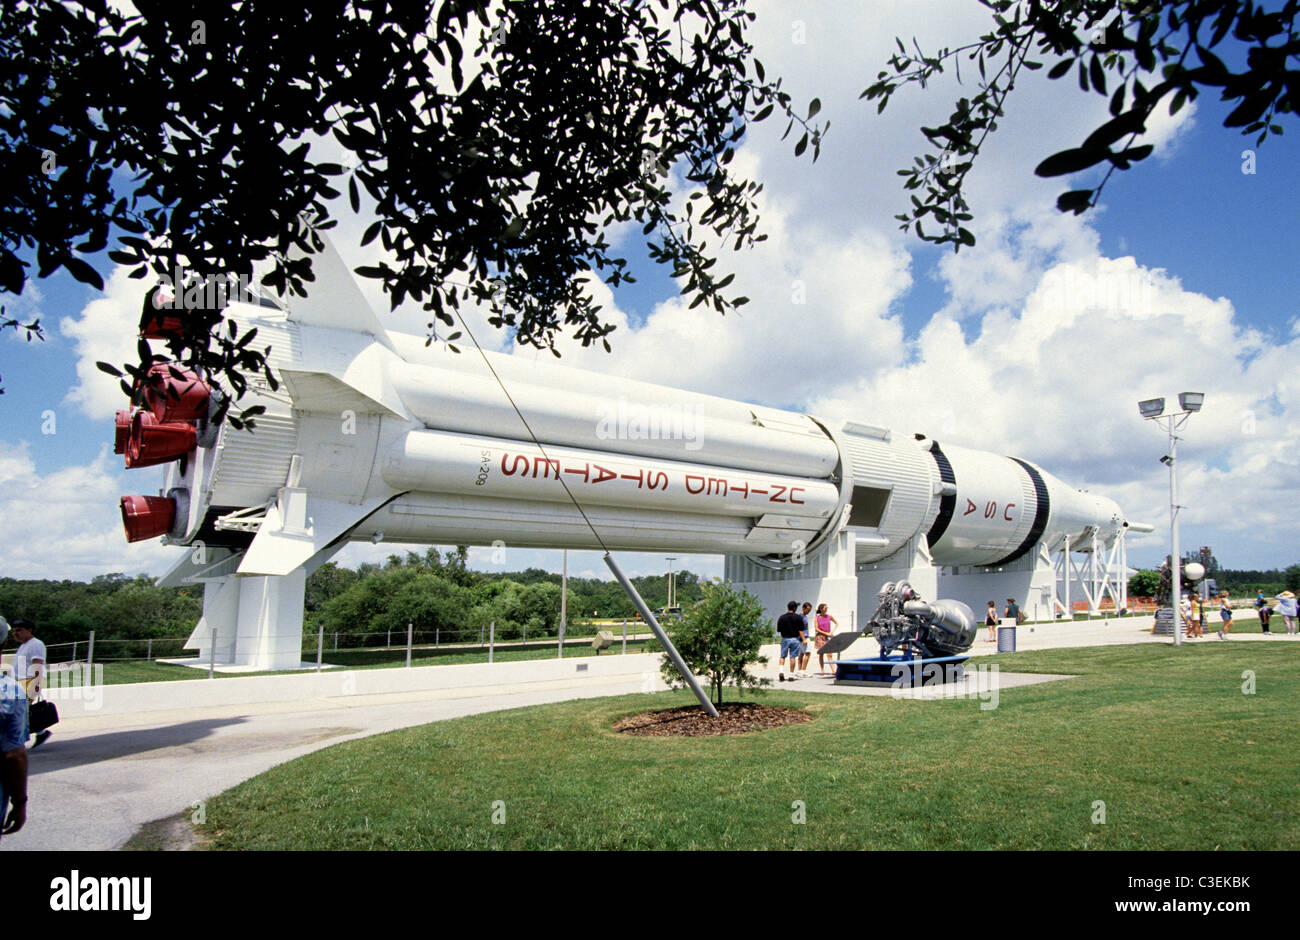 A Saturn 1B rocket in the NASA Rocket Garden at the Kennedy Space Center Centre in Florida Stock Photo